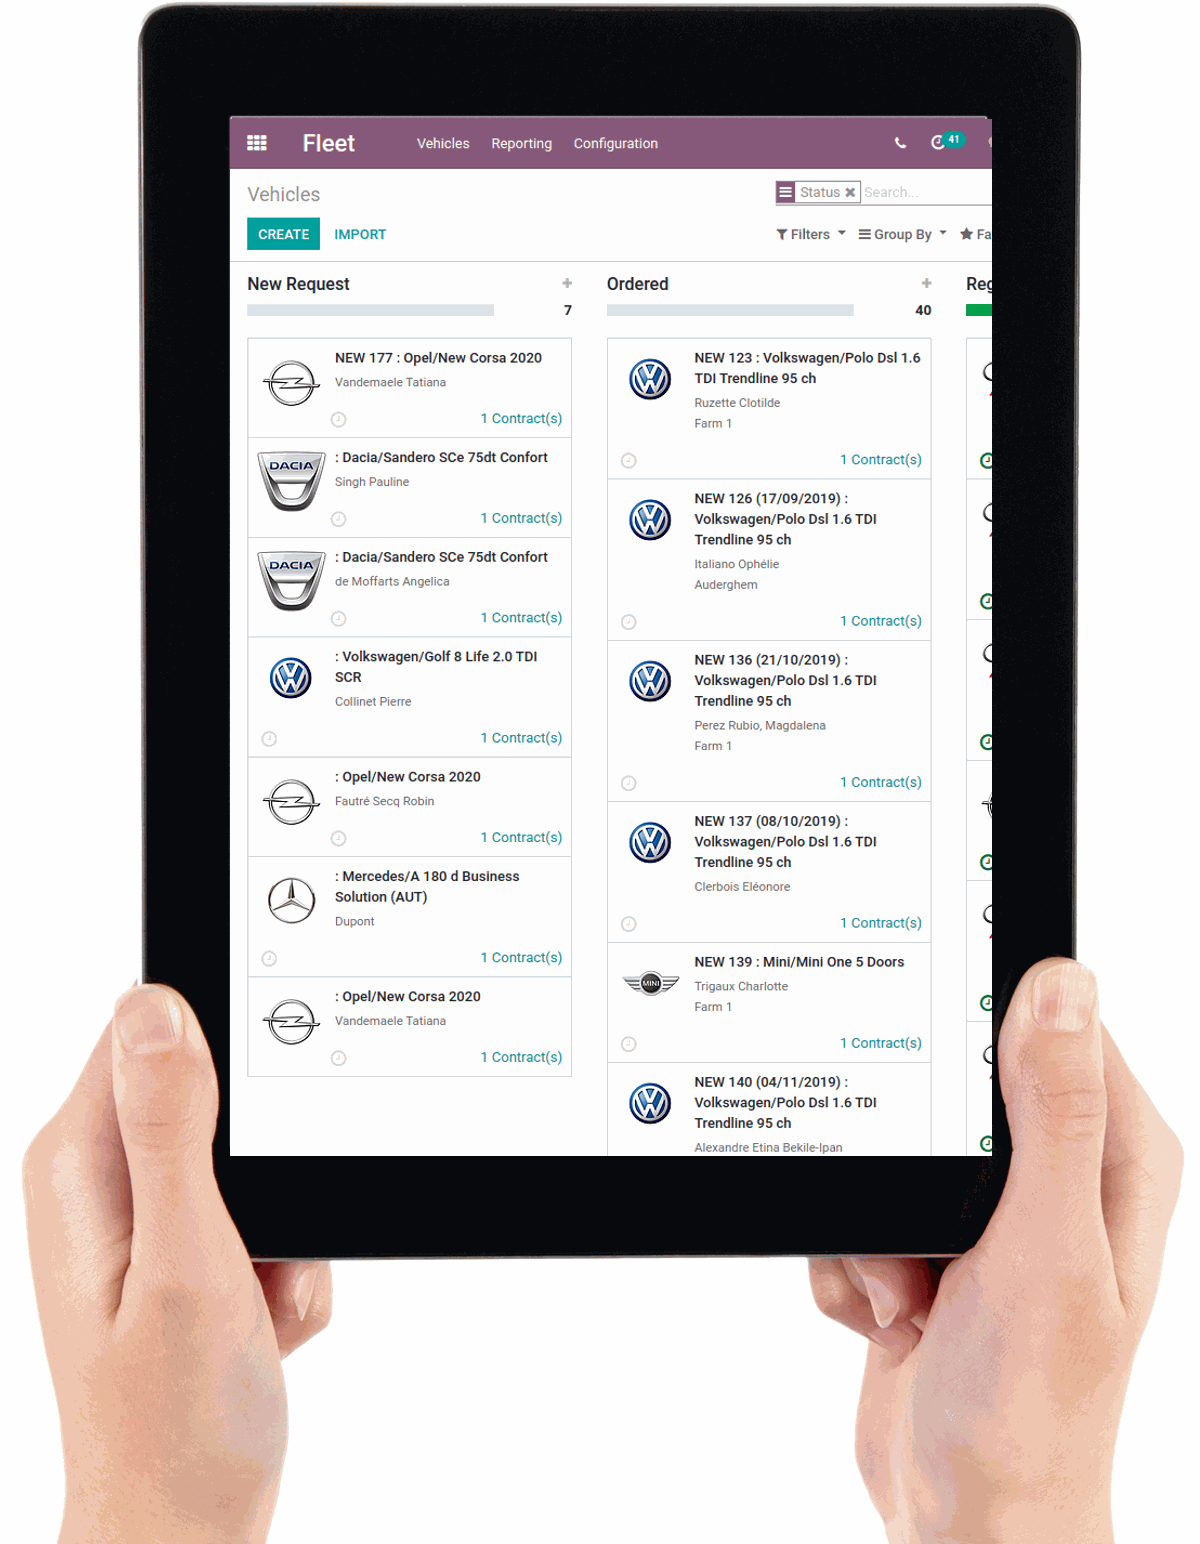 Odoo Fleet's interface showing a list of vehicles on a tablet